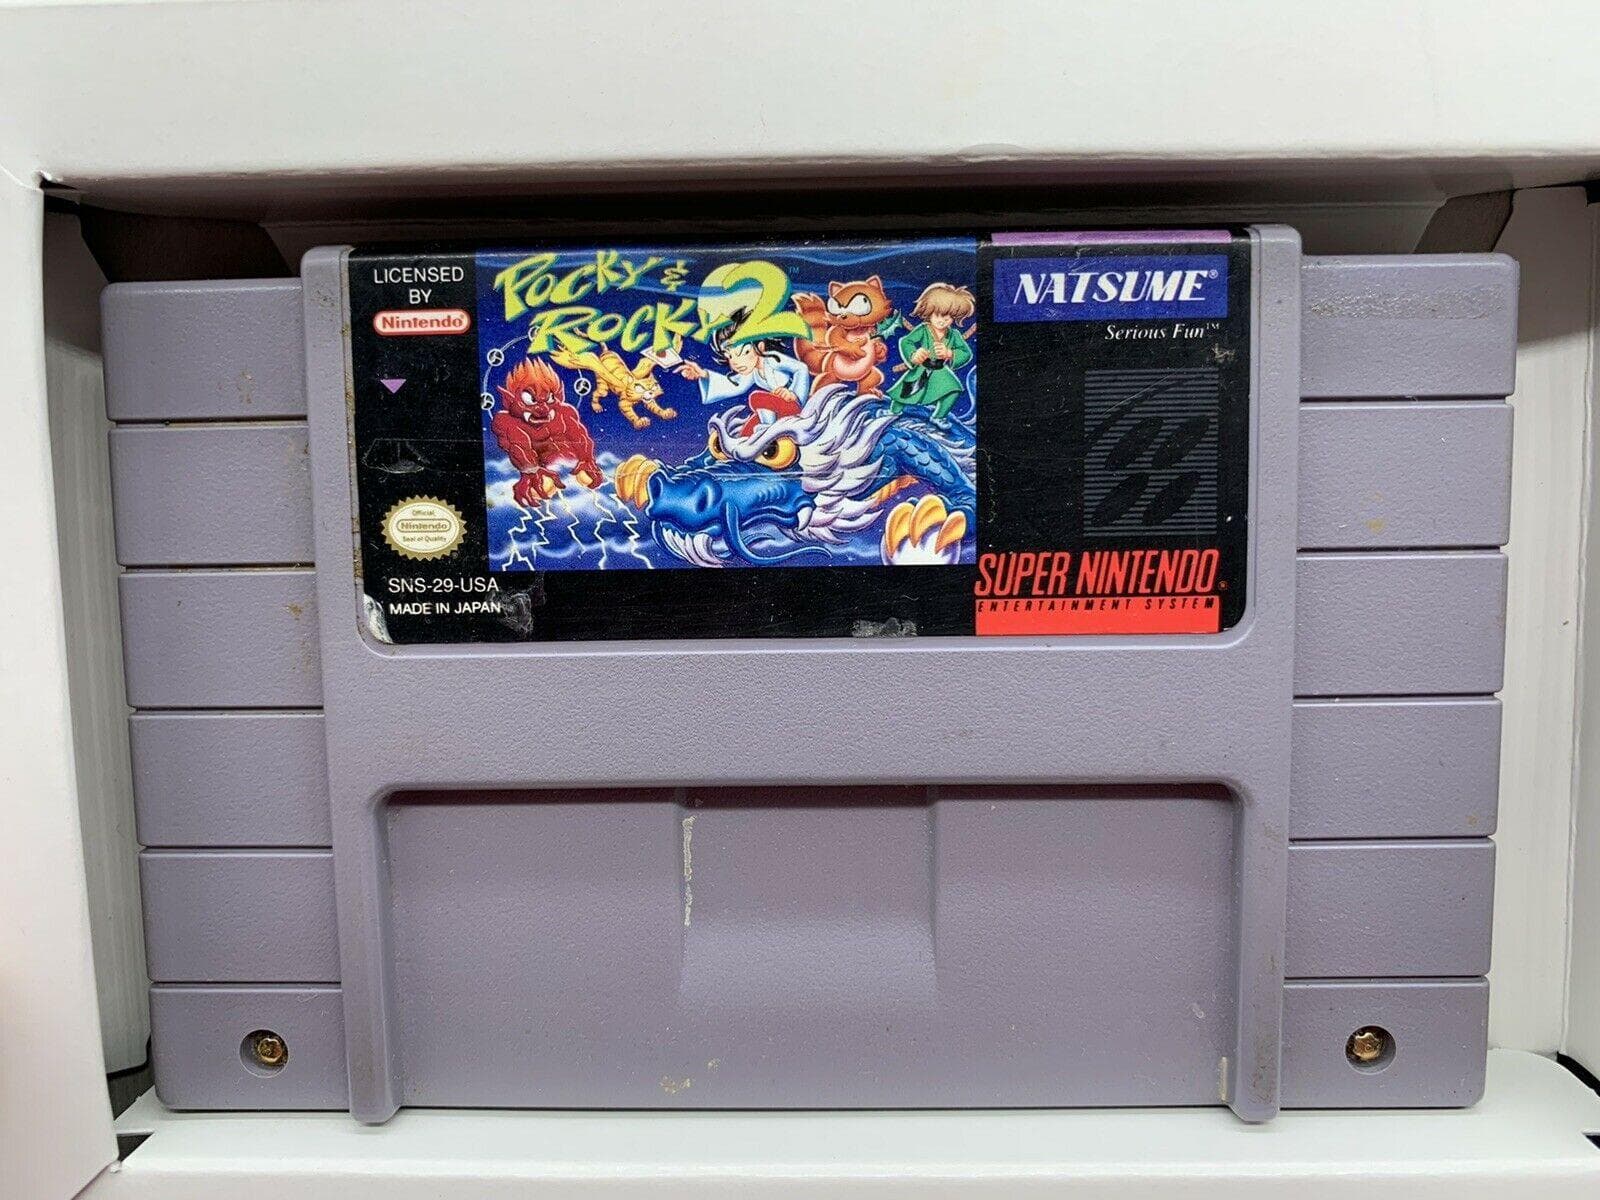 snes game prices